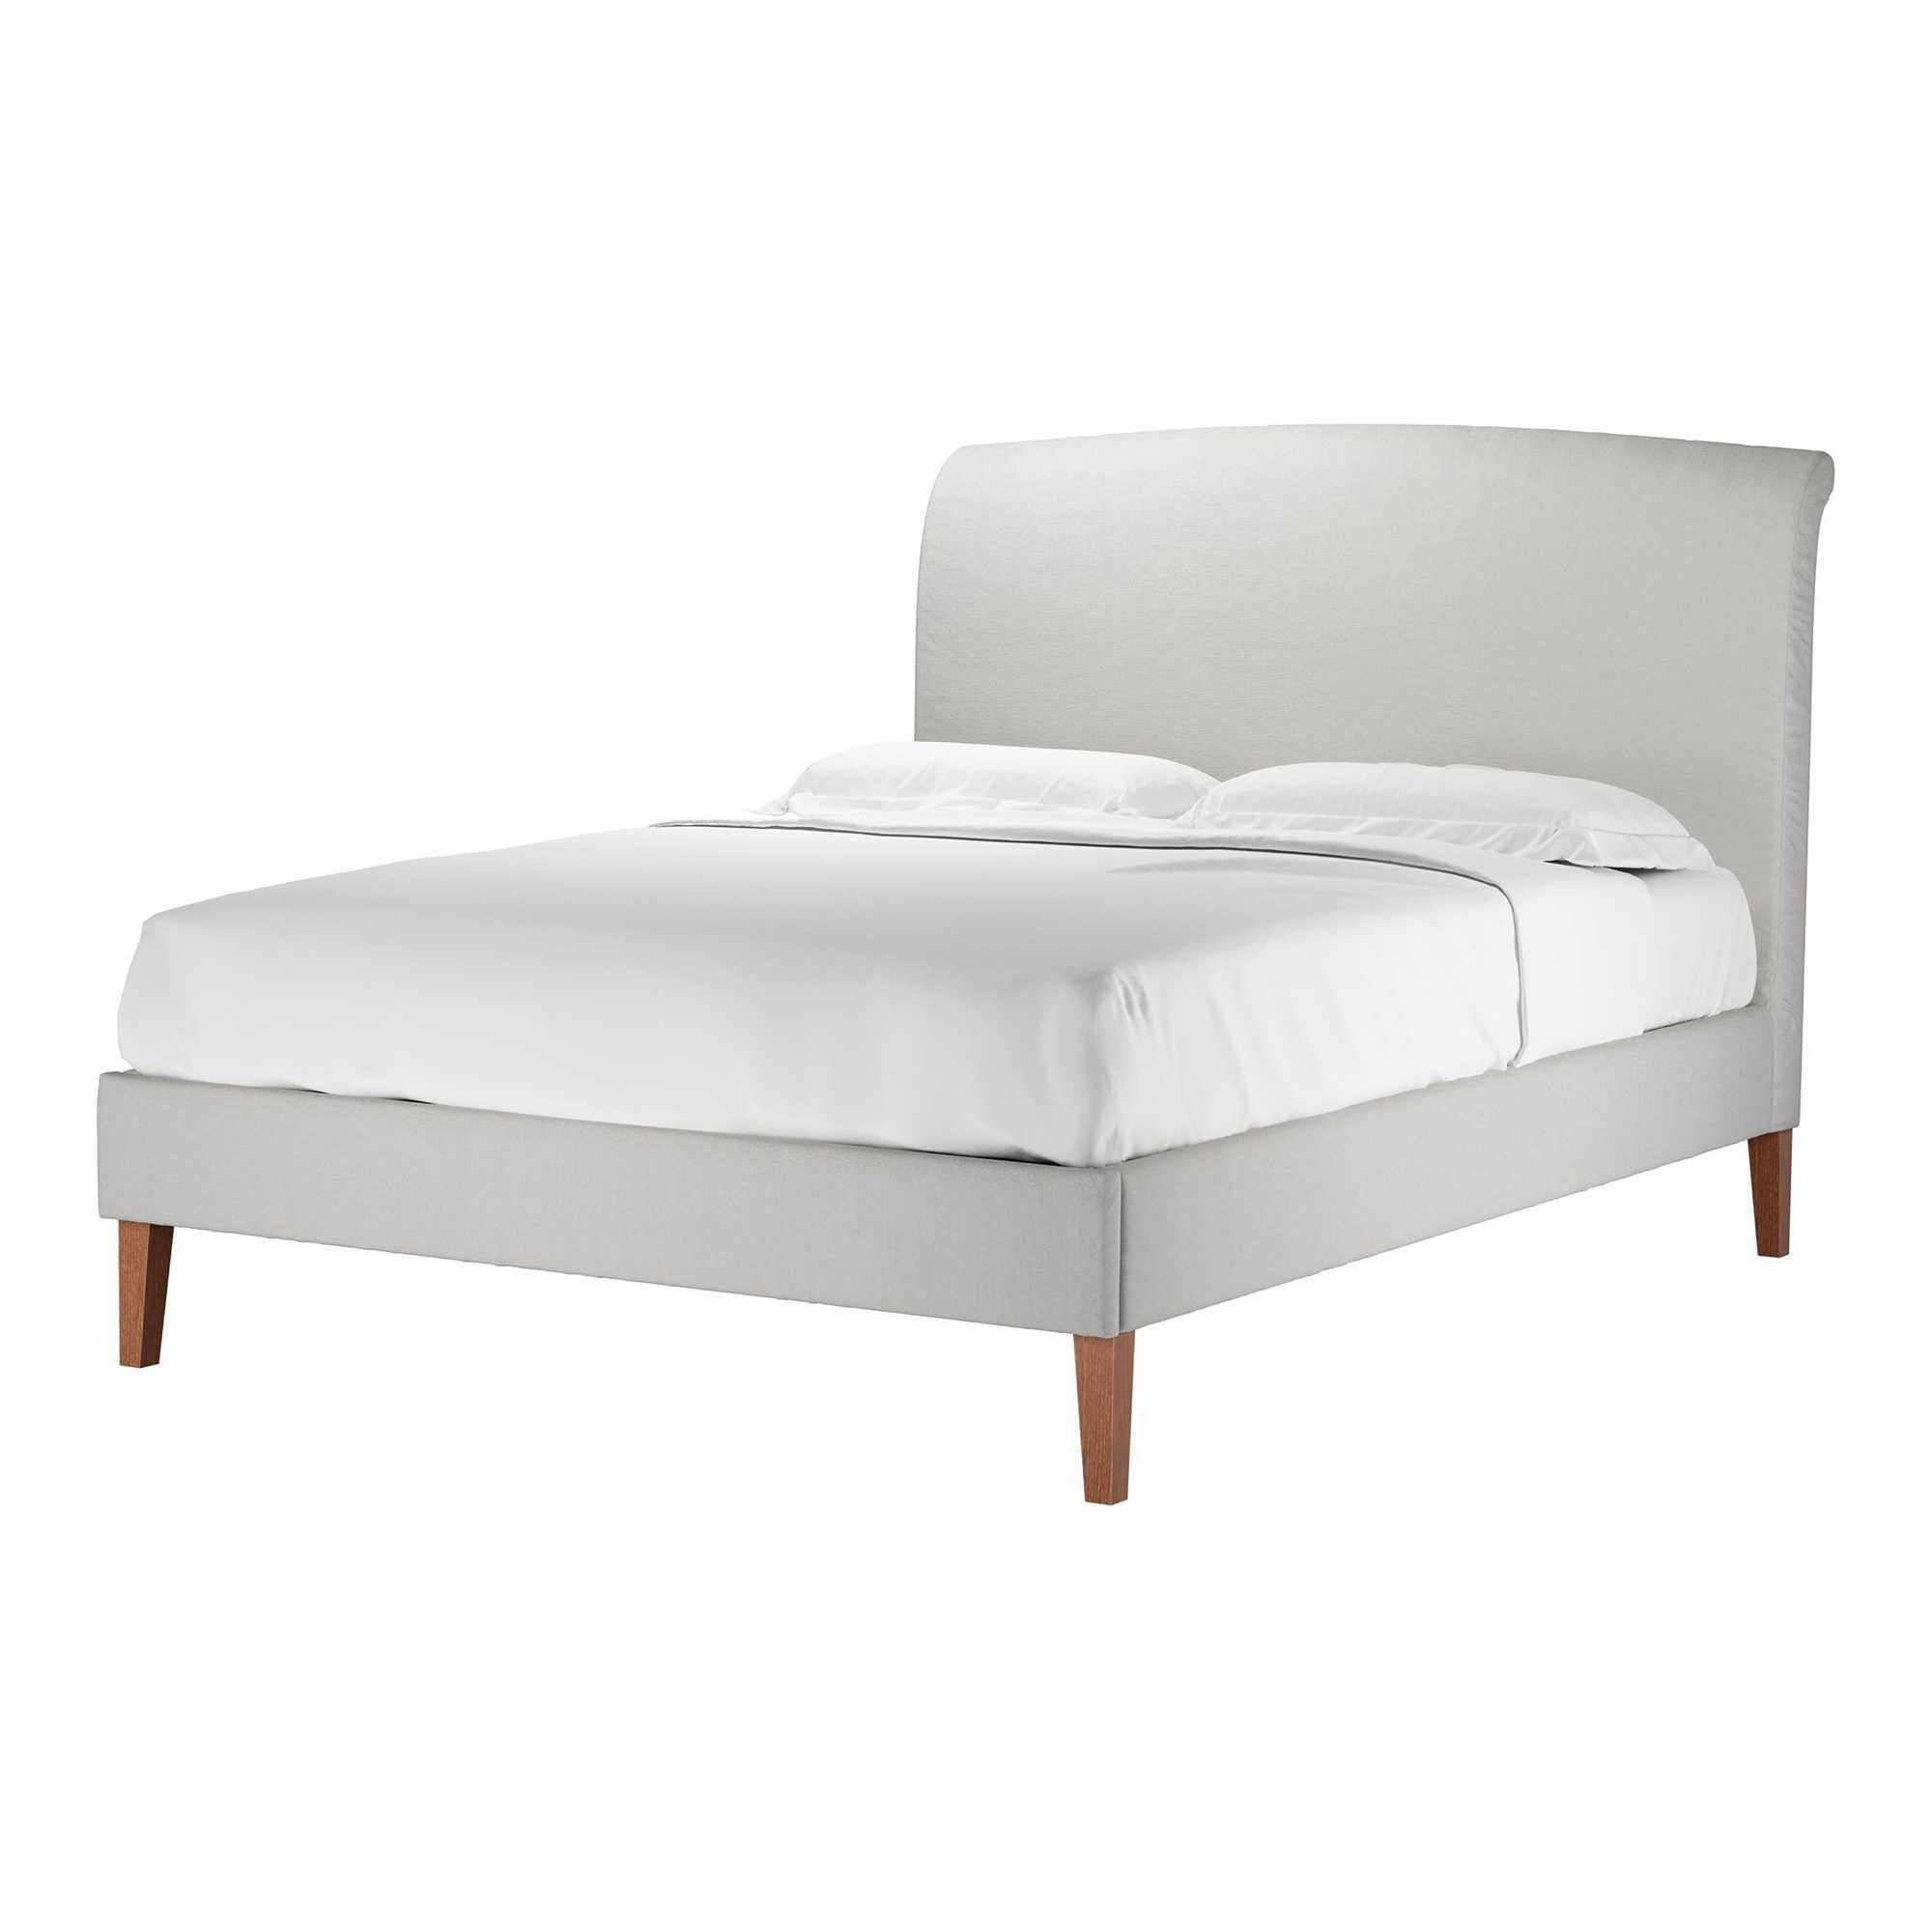 Thea Alabaster Brushed Linen Cotton Bed - King Size